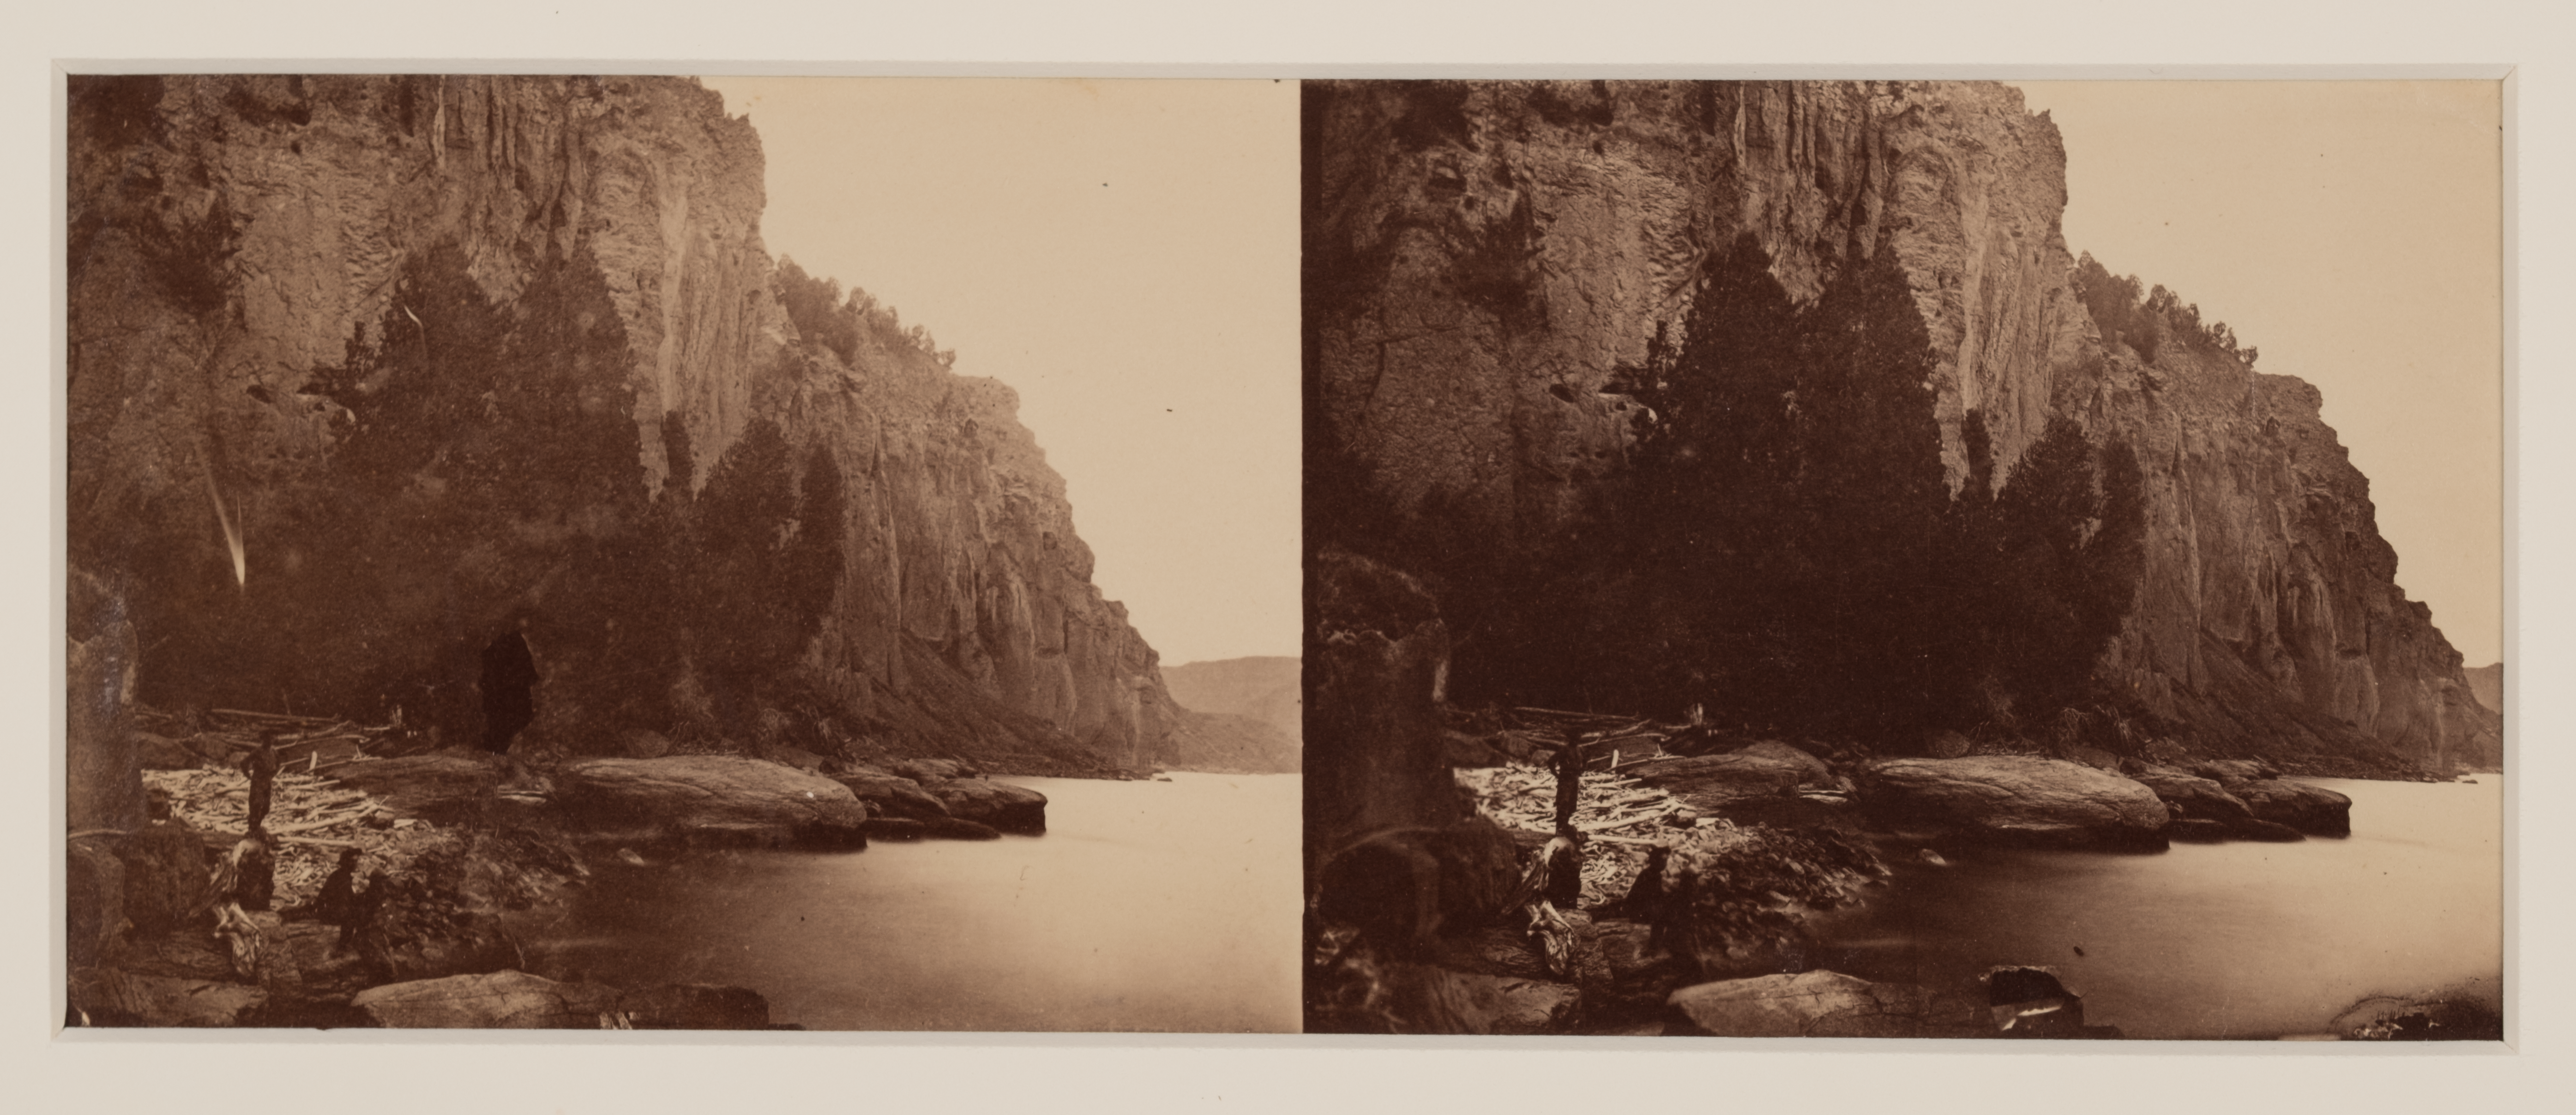 Timothy O'Sullivan, Stereograph of a Western Survey